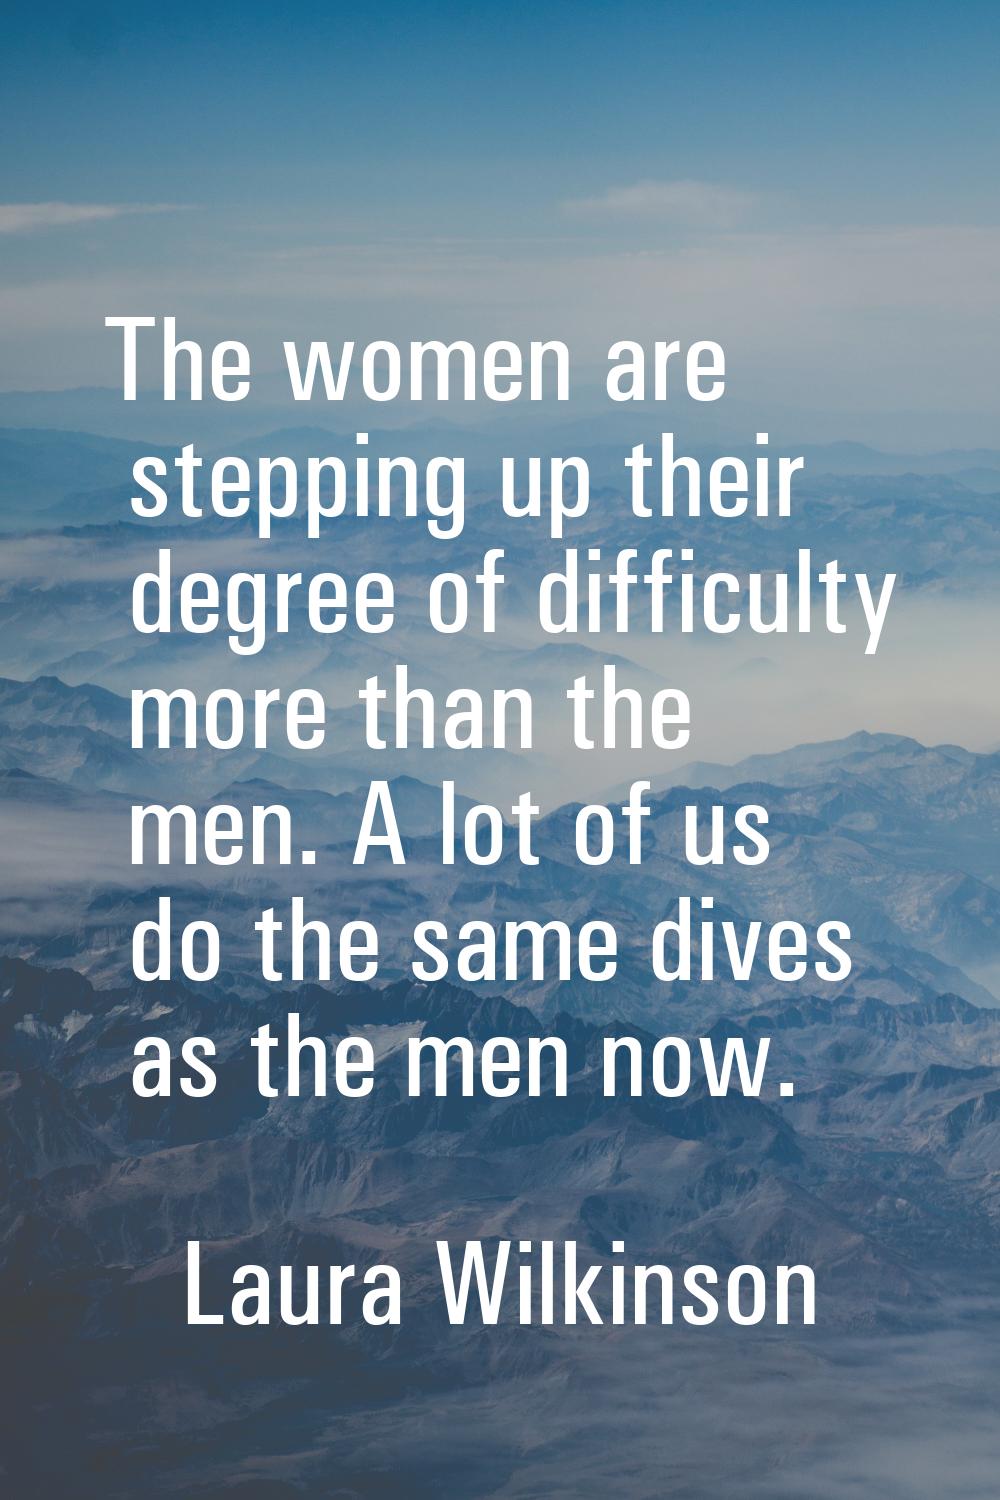 The women are stepping up their degree of difficulty more than the men. A lot of us do the same div